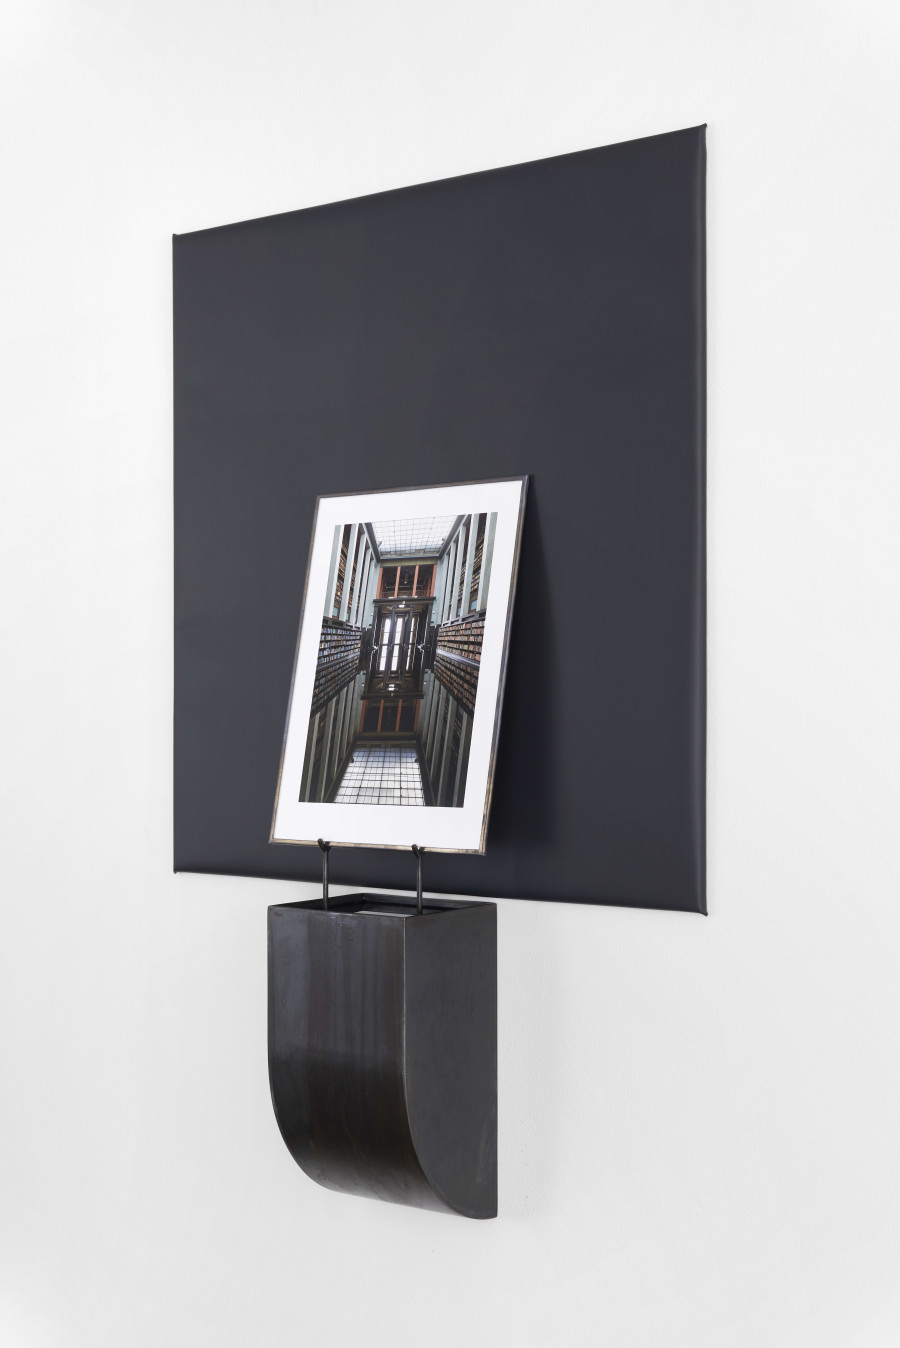 Gamle Deichman (Oslo), 2023, Giclée print on cotton paper with Laed frame, iron structure, artist’s oil-based mix, Polyolefine, wood, 81 x 30 x 17 cm, Unique. Photo: Philipp Hänger. Courtesy the artist and Wilde